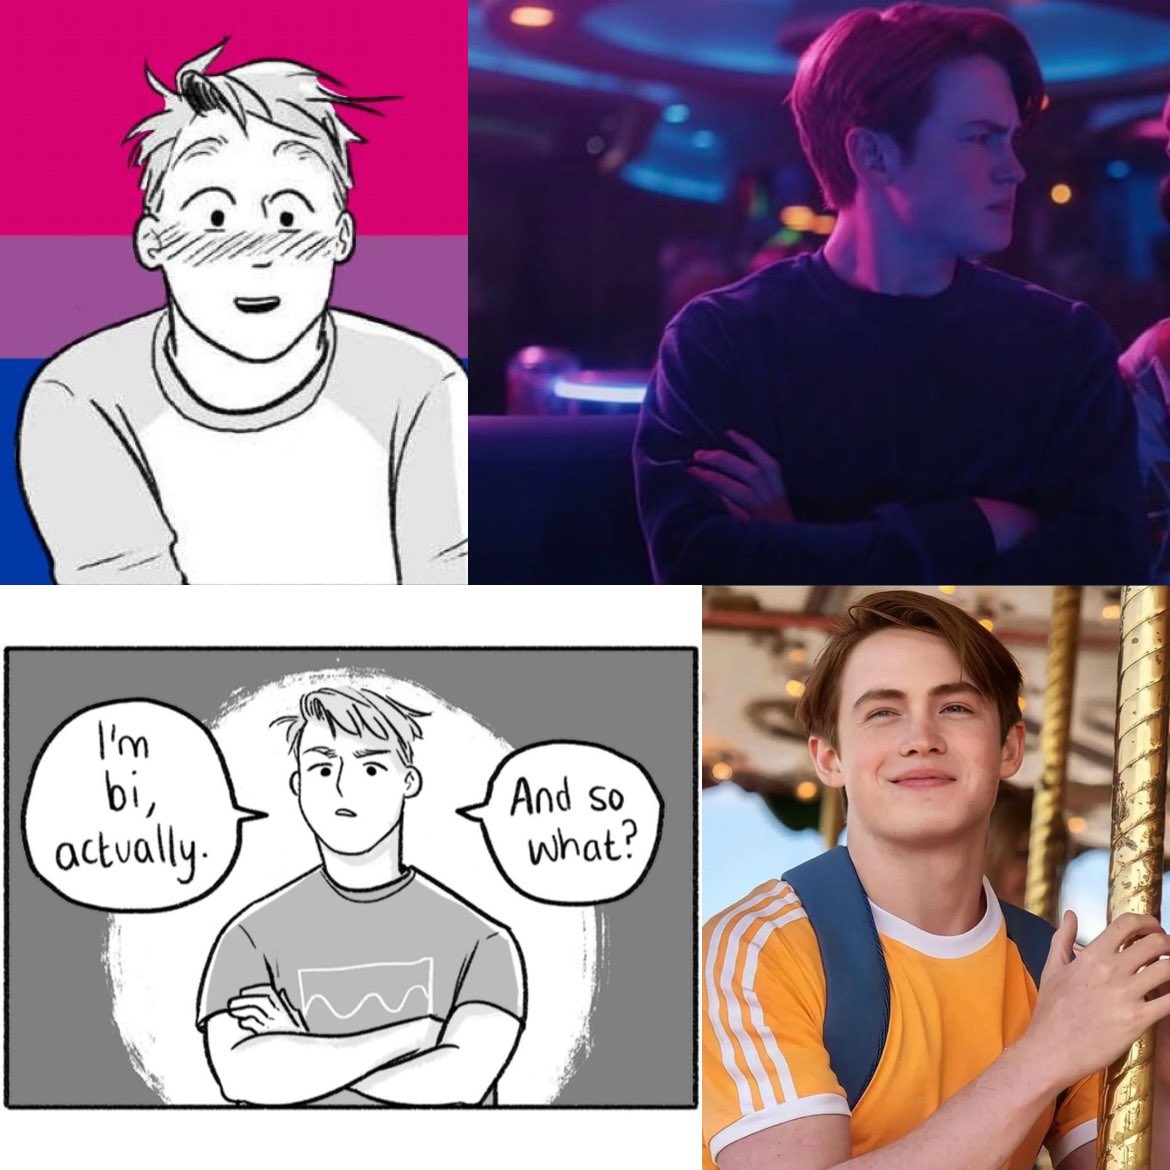 bisexual people are not confused, we are bisexual 

thank you kit connor for wonderfully portraying nick nelson

#BisexualAwarenessWeek